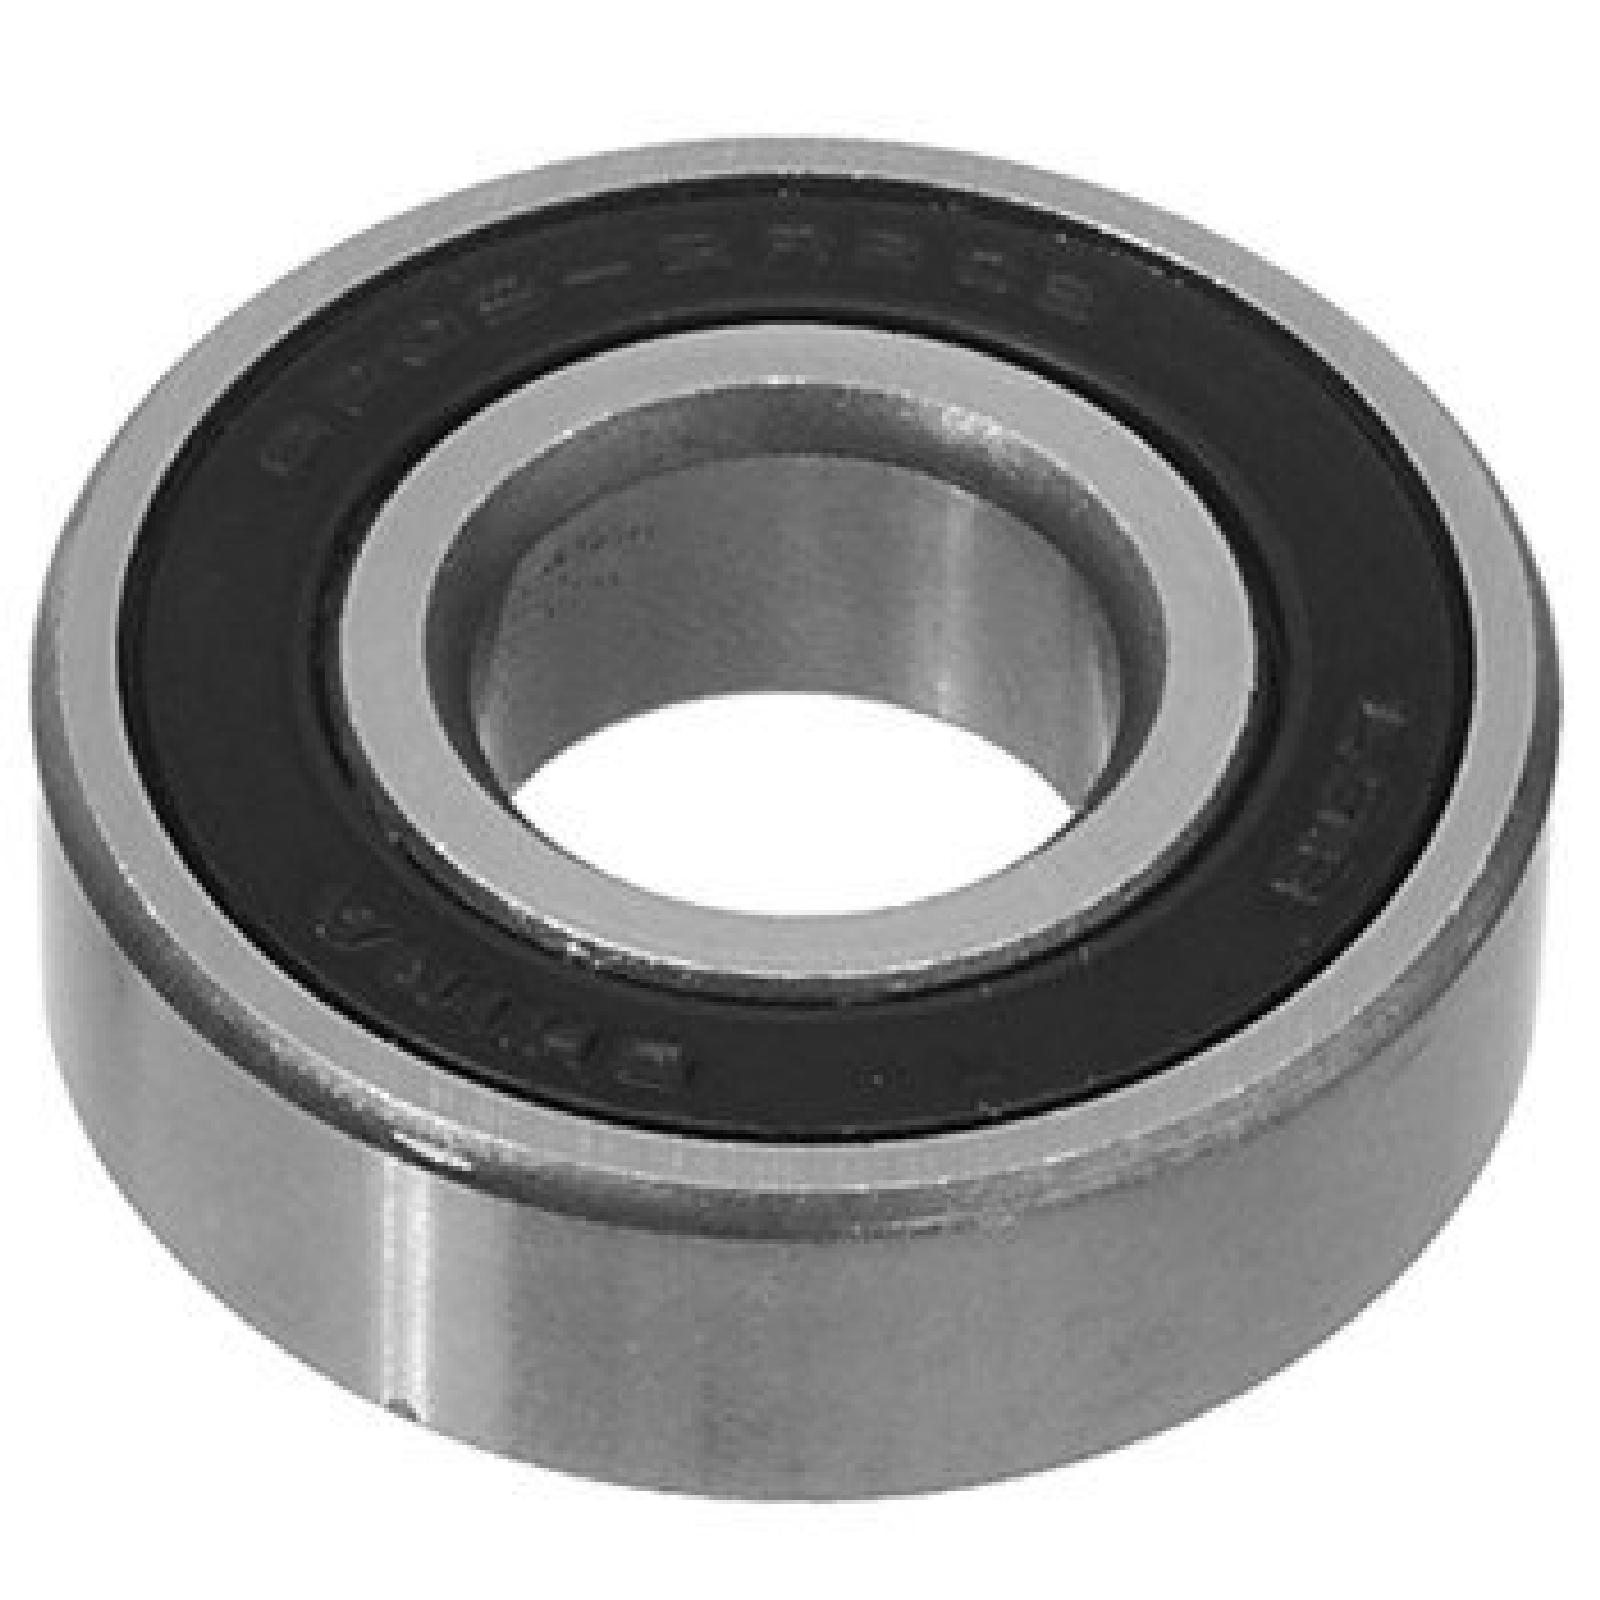 BEARING, BALL MAGNUM 6204 part# 45-259 by Oregon